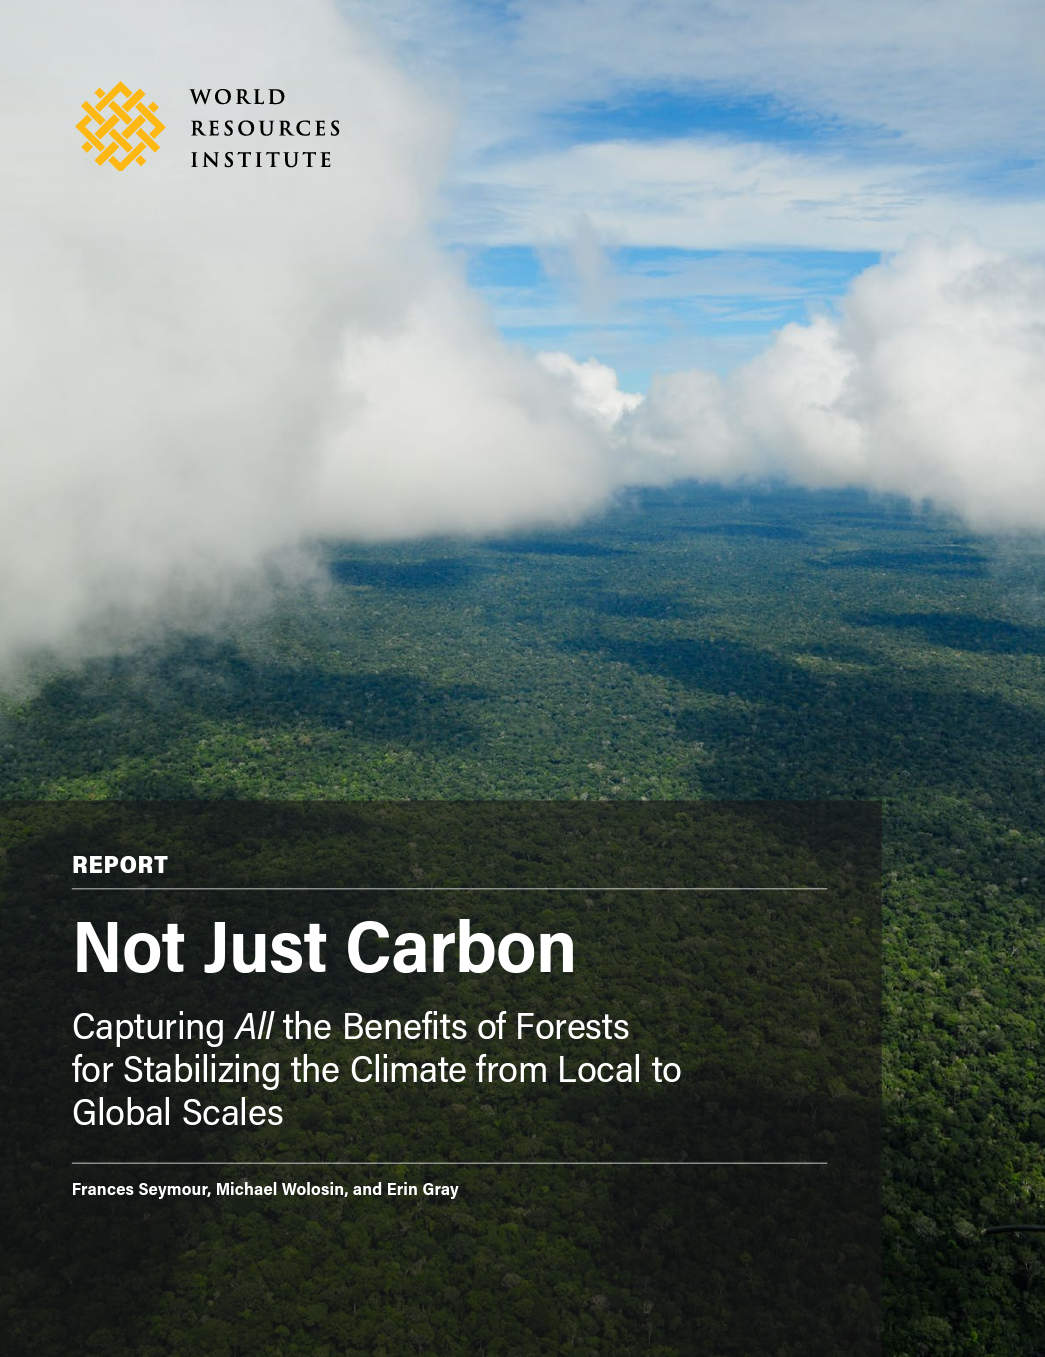 Not Just Carbon: Capturing All the Benefits of Forests for Stabilizing the Climate from Local to Global Scales